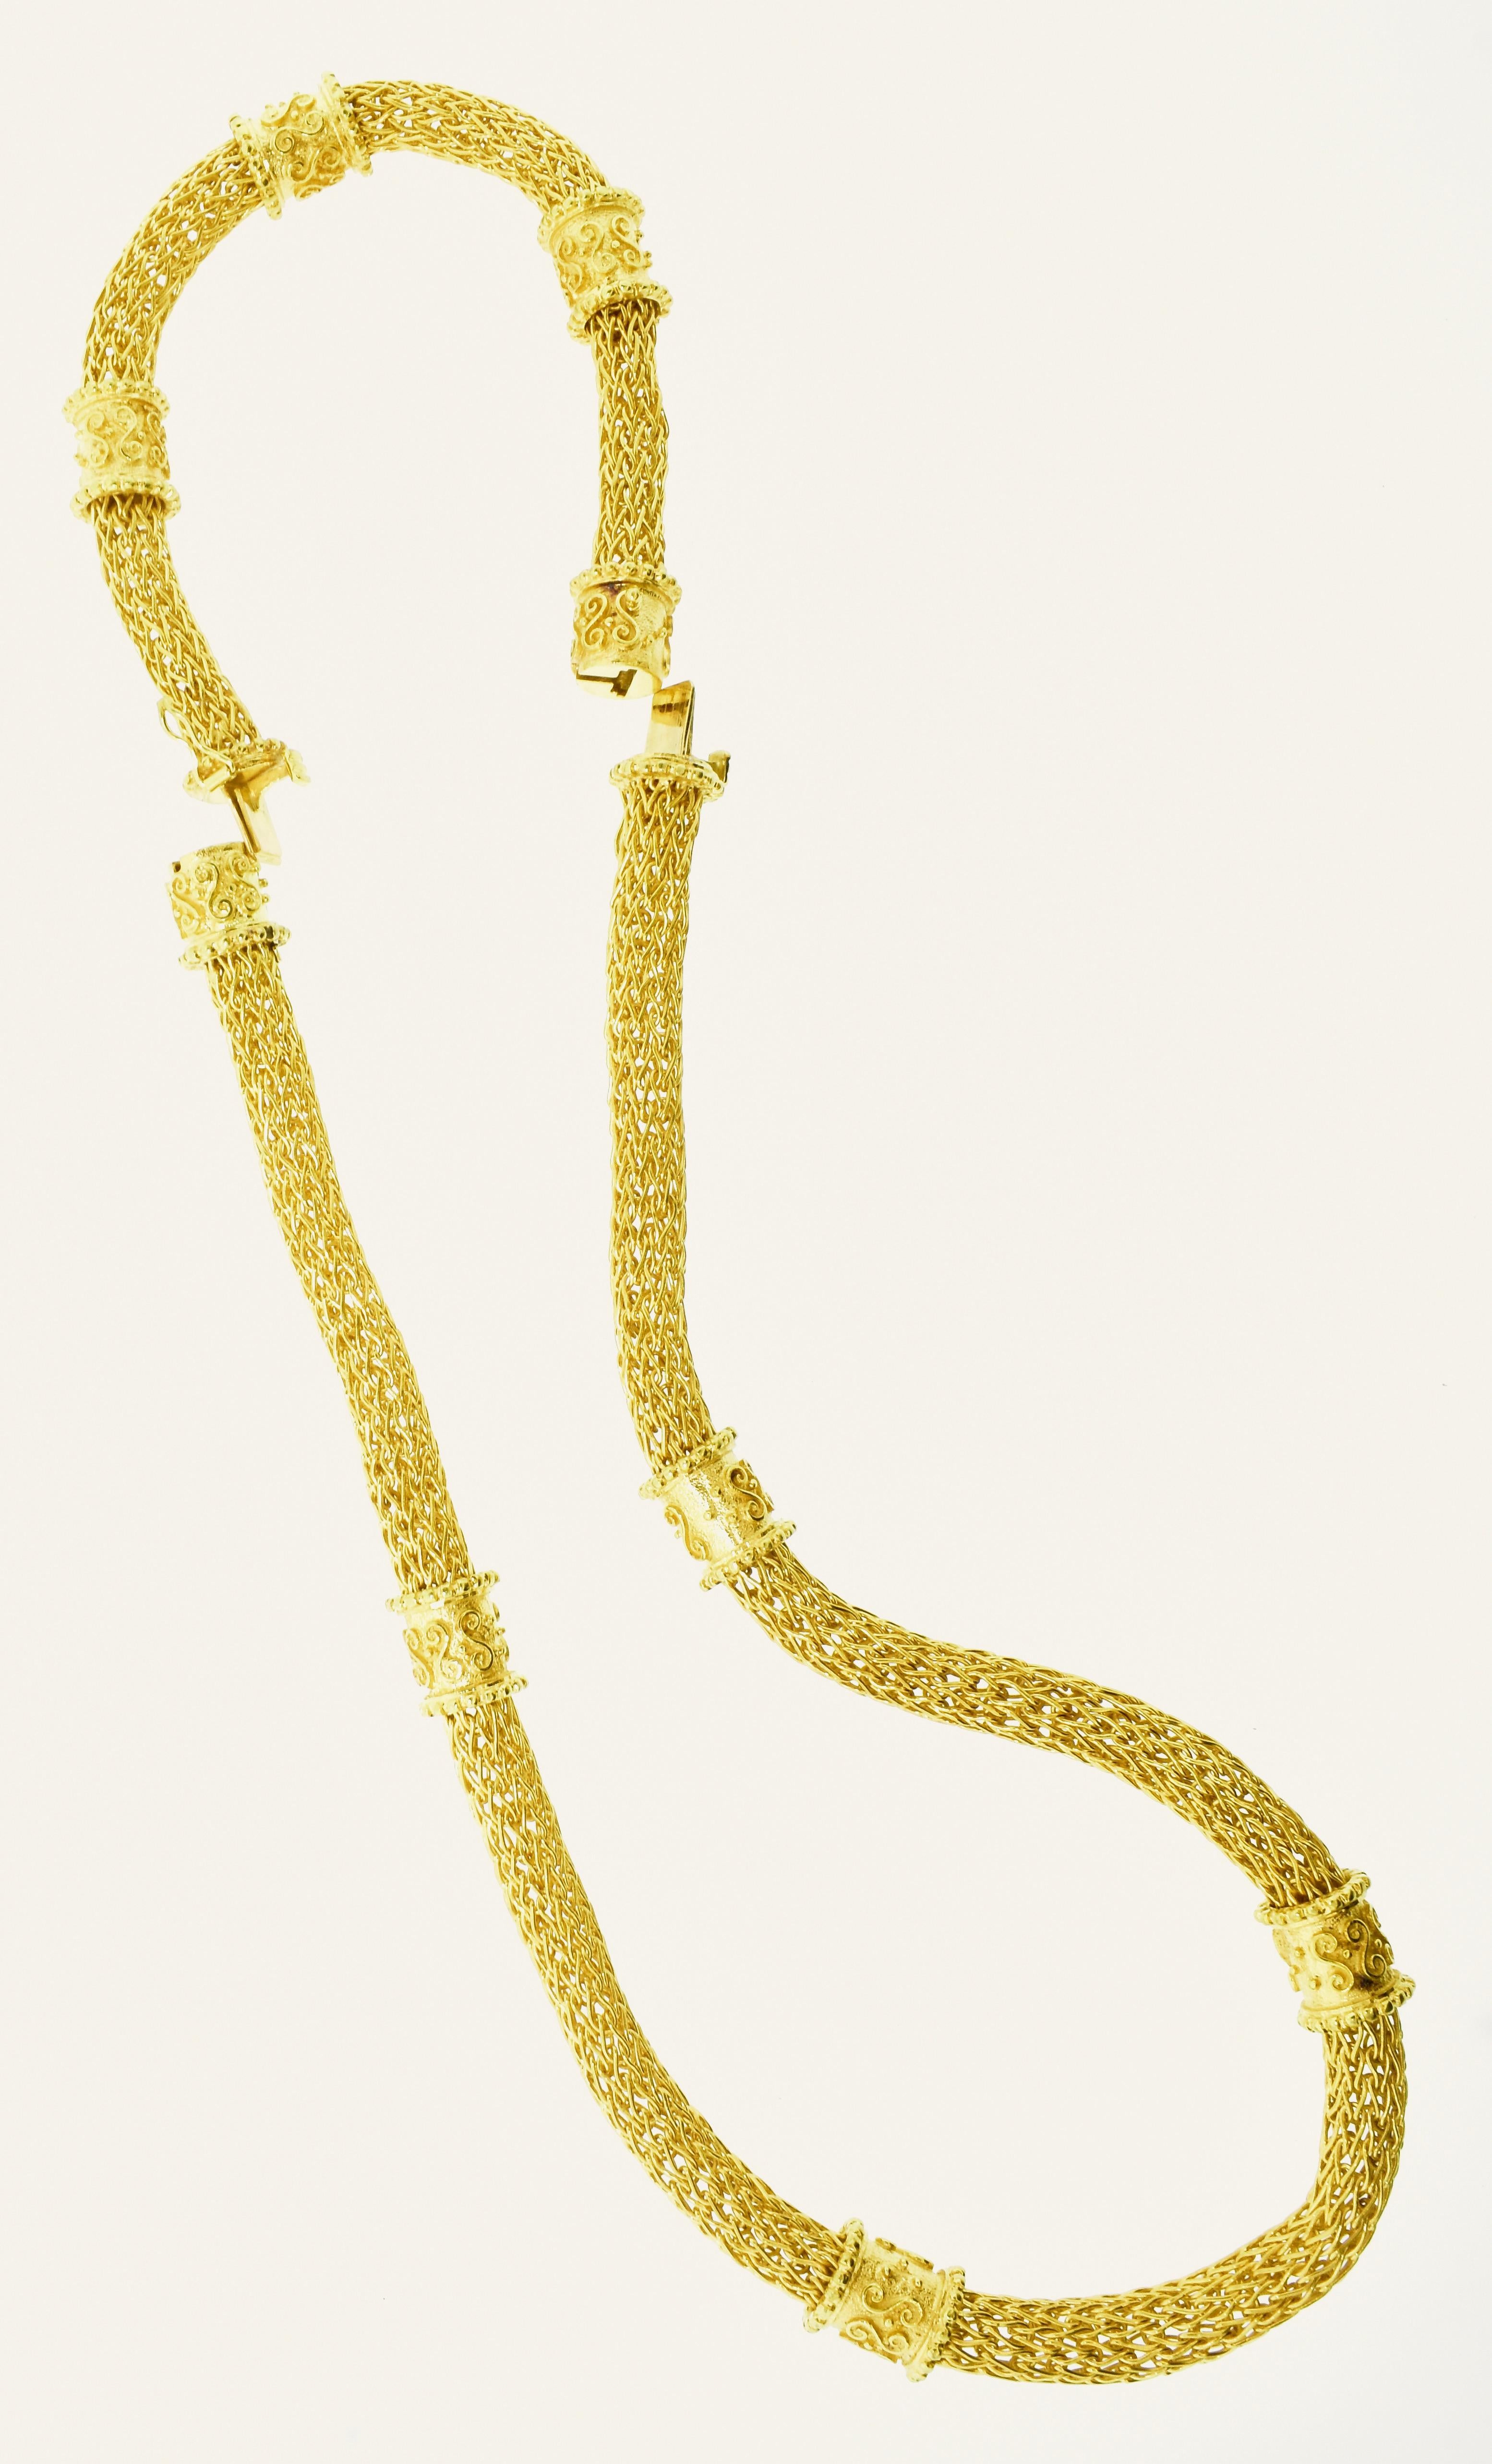 Important 18K yellow gold necklace and bracelet.  This is a 24.5 inch necklace that is one-half inch at its widest points.  It weighs 4.25 troy ounces or 132.25 grams. It consists of nine carved hard elements that fit over woven gold - which is